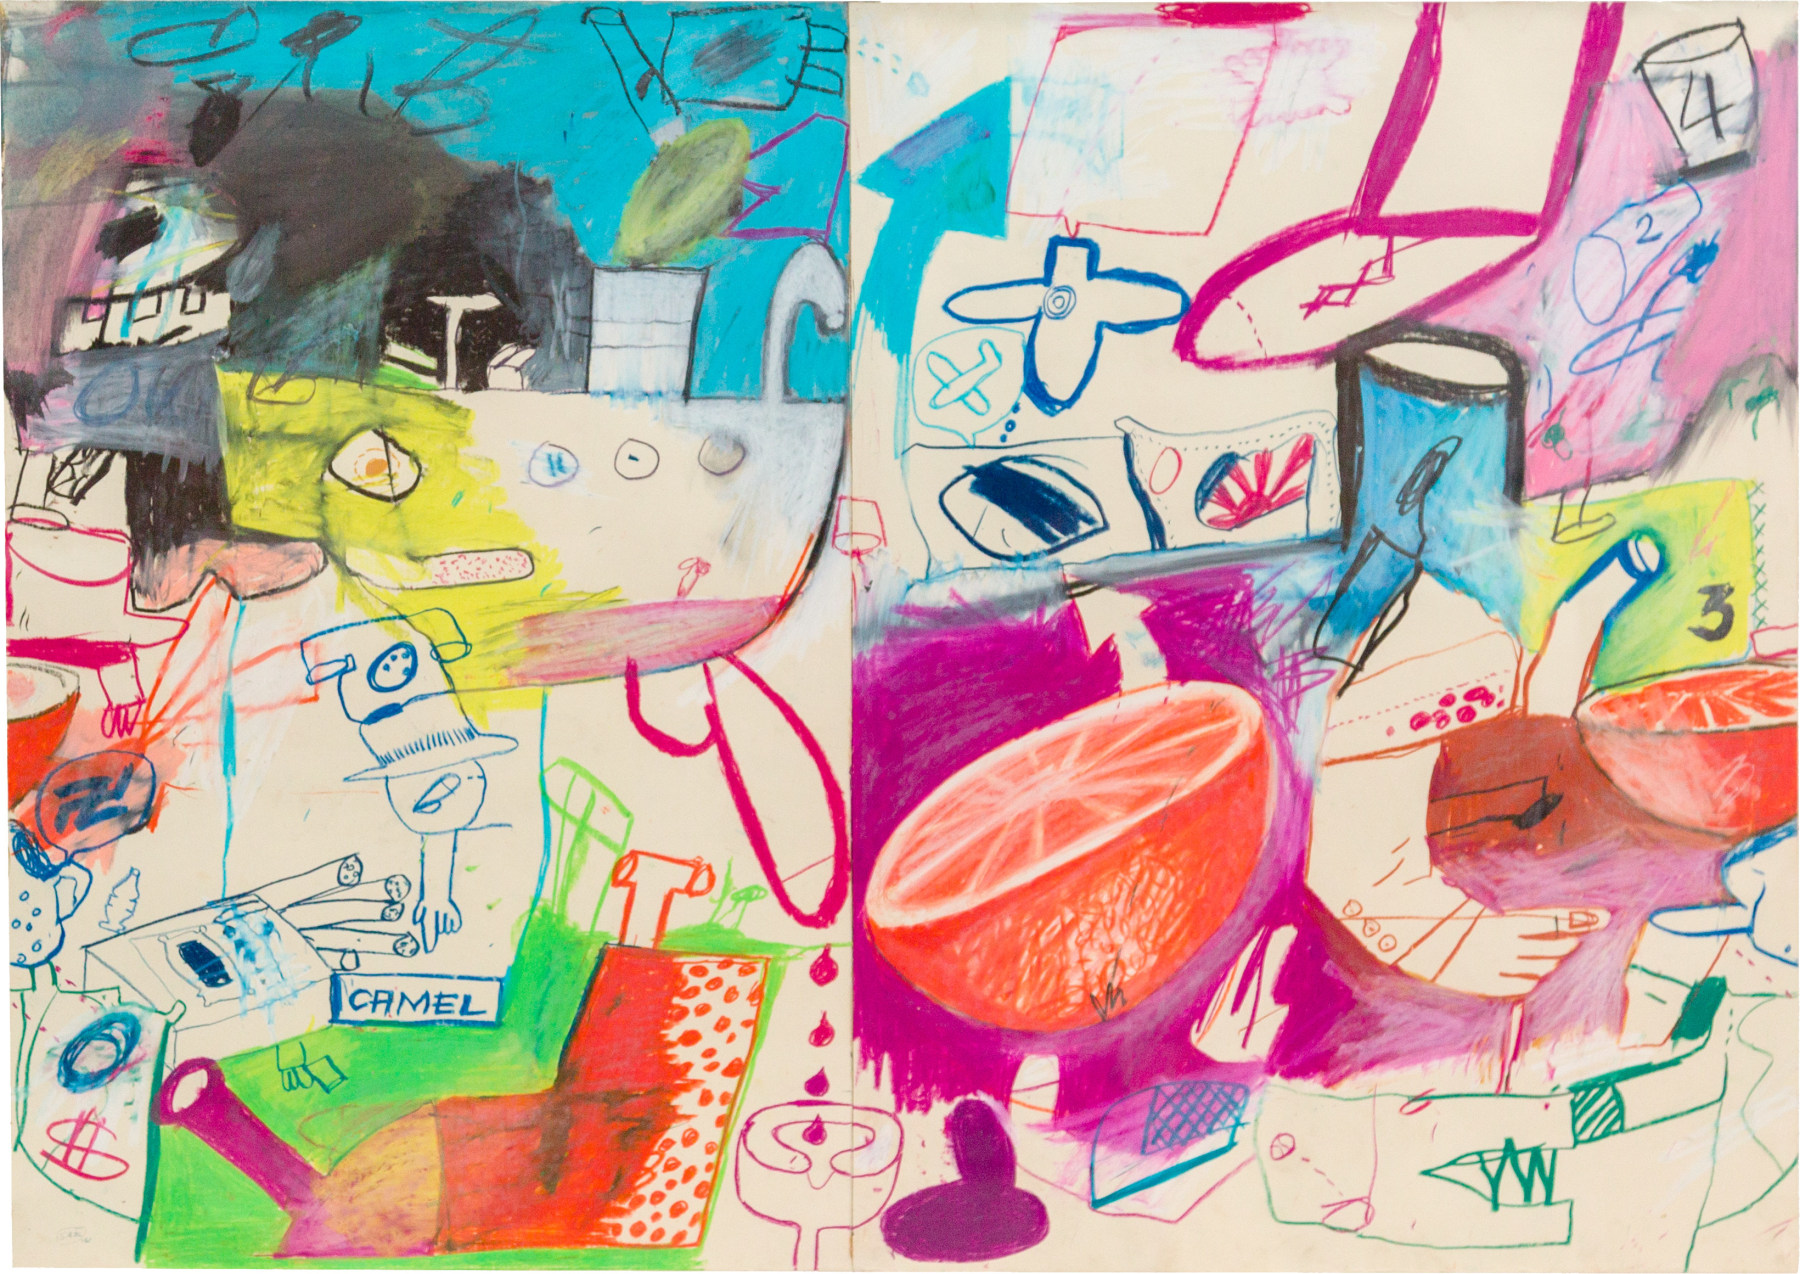 Peter Saul: Early Works on Paper (1957-1965)
November 14, 2022 &amp;ndash; January 22, 2023
120 East 65th Street

Image link